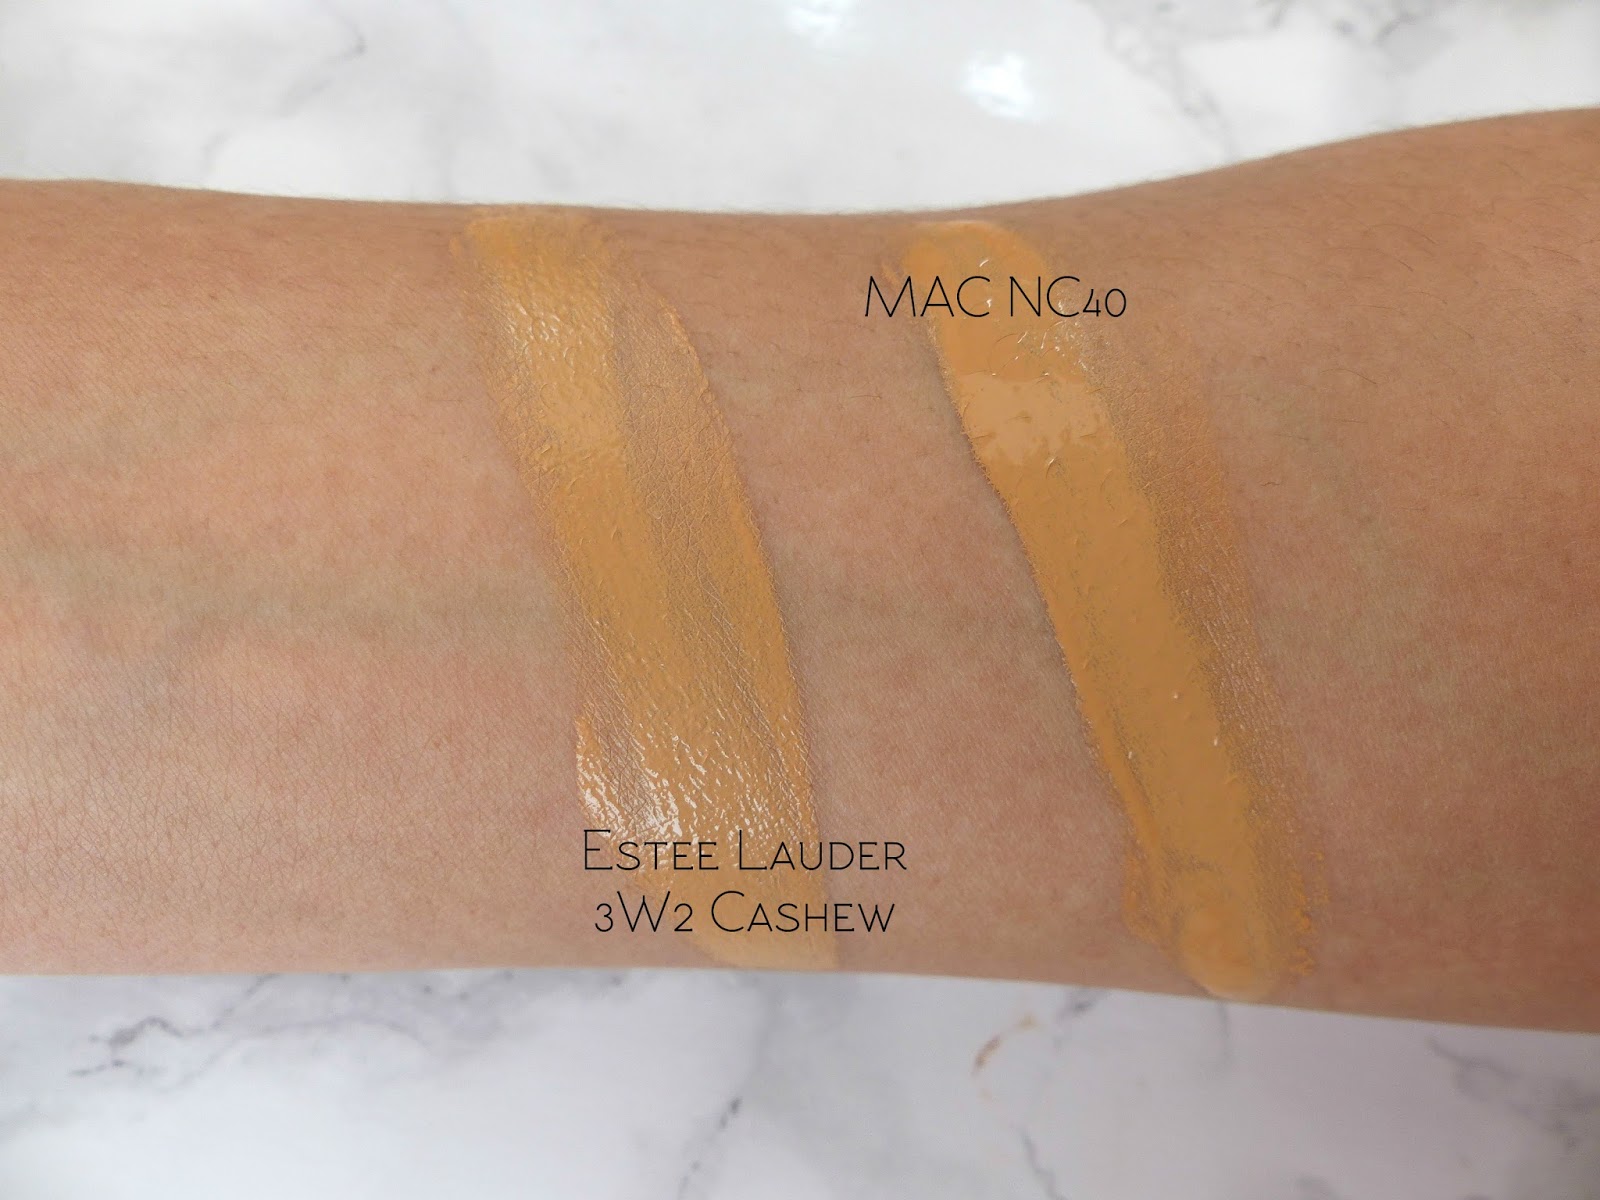 MAC NC40 Studio Fix Fluid Foundation Dupes - All In The Blush